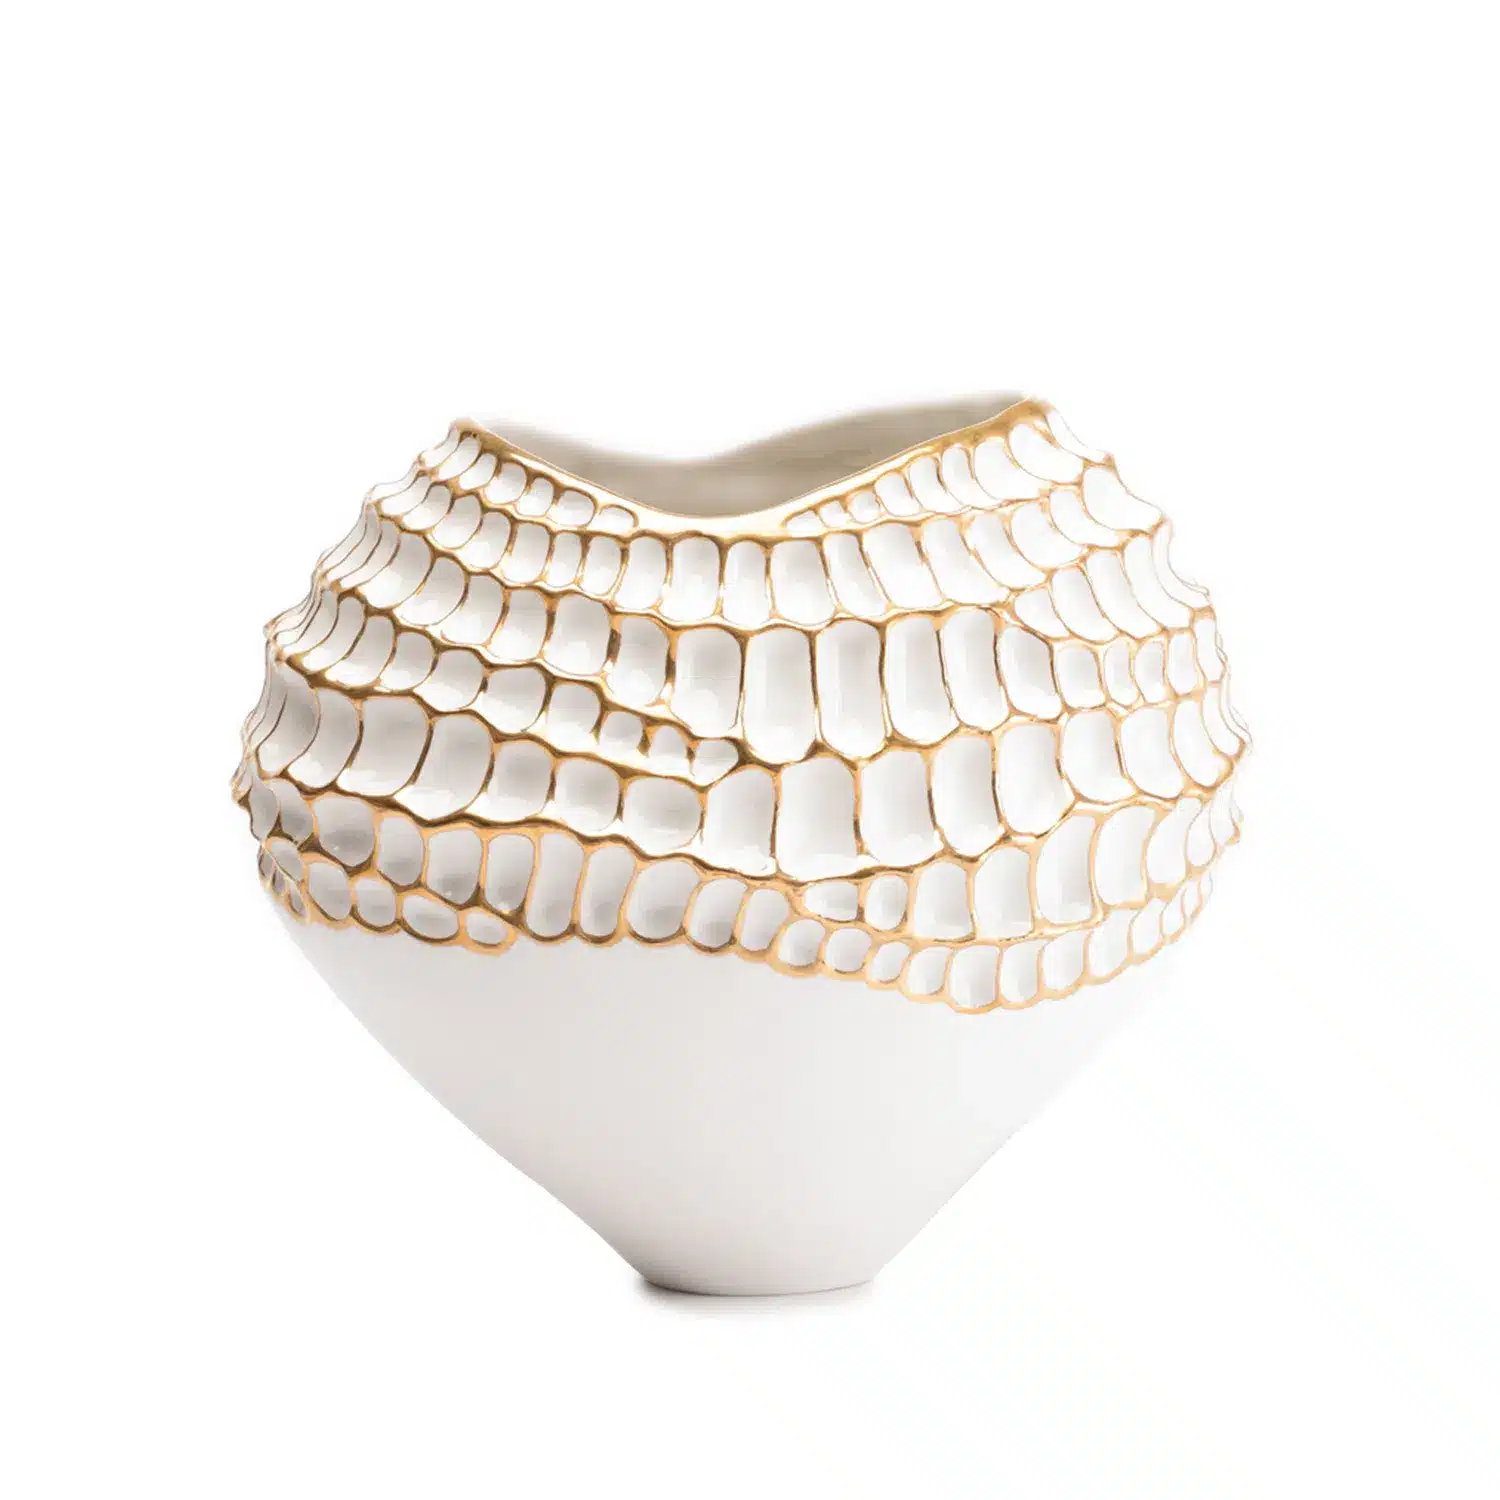 Frederica vase, a beautiful luxurious home accessory